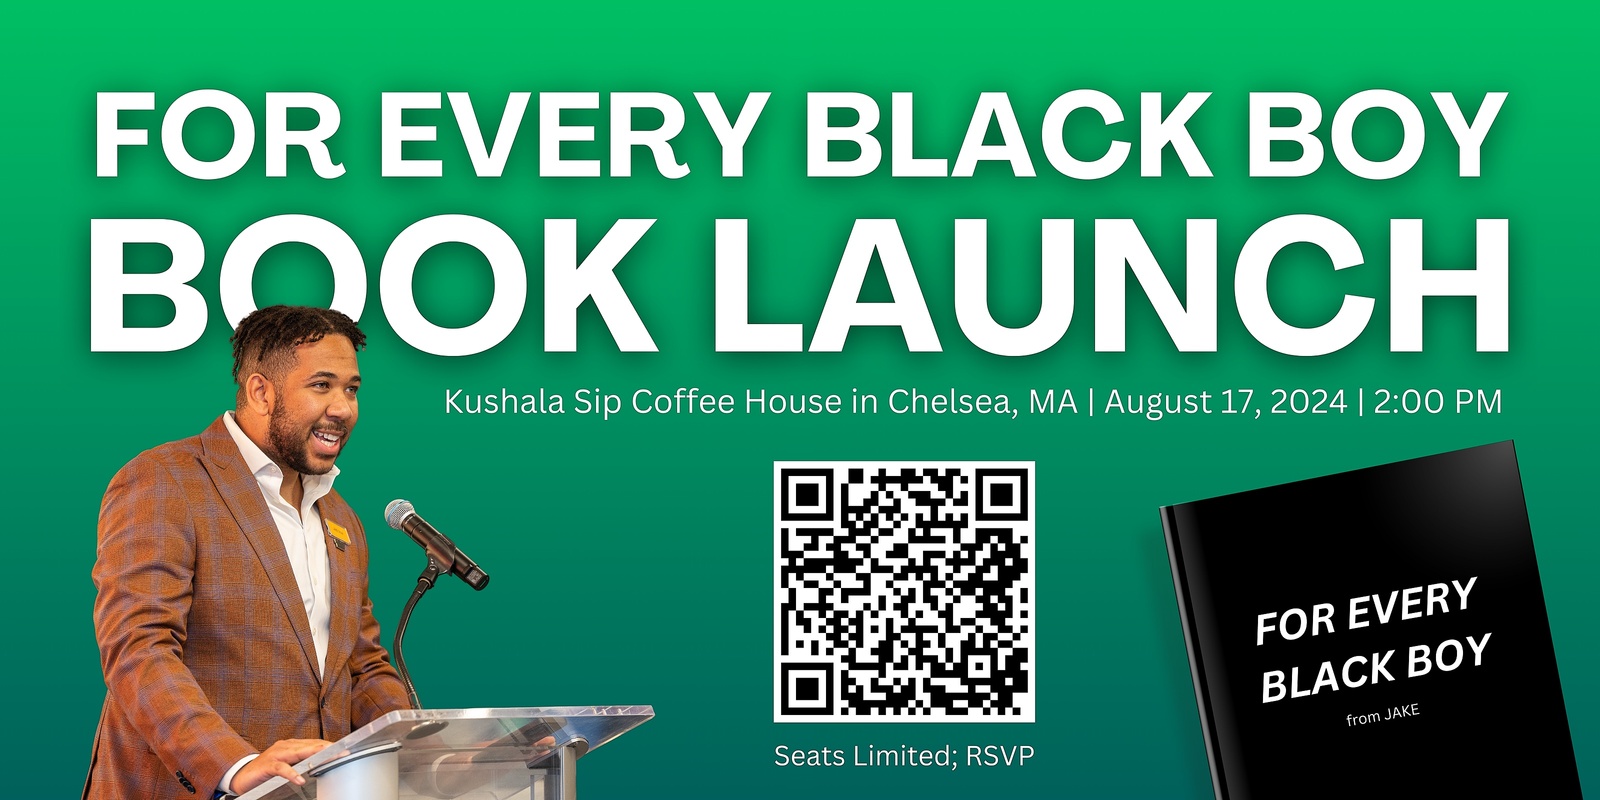 Banner image for "FOR EVERY BLACK BOY" Book Launch 